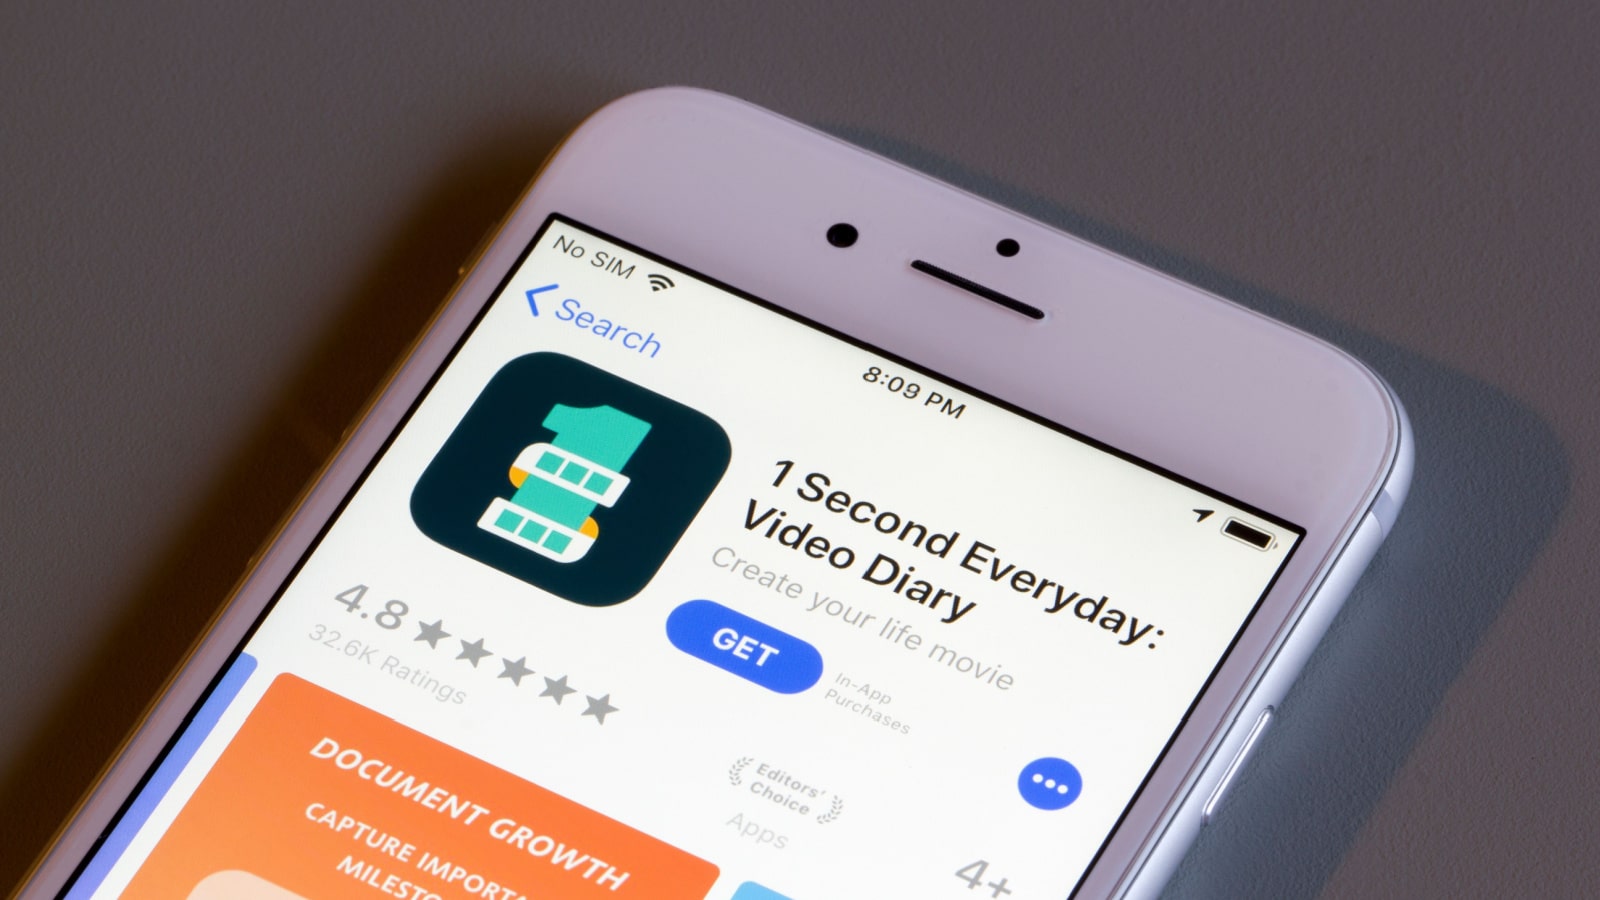 Portland, OR, USA - May 14, 2020: 1 Second Everyday app icon is seen on an iPhone. The app allows users to record one second of video everyday and then chronologically edits them together into a film.